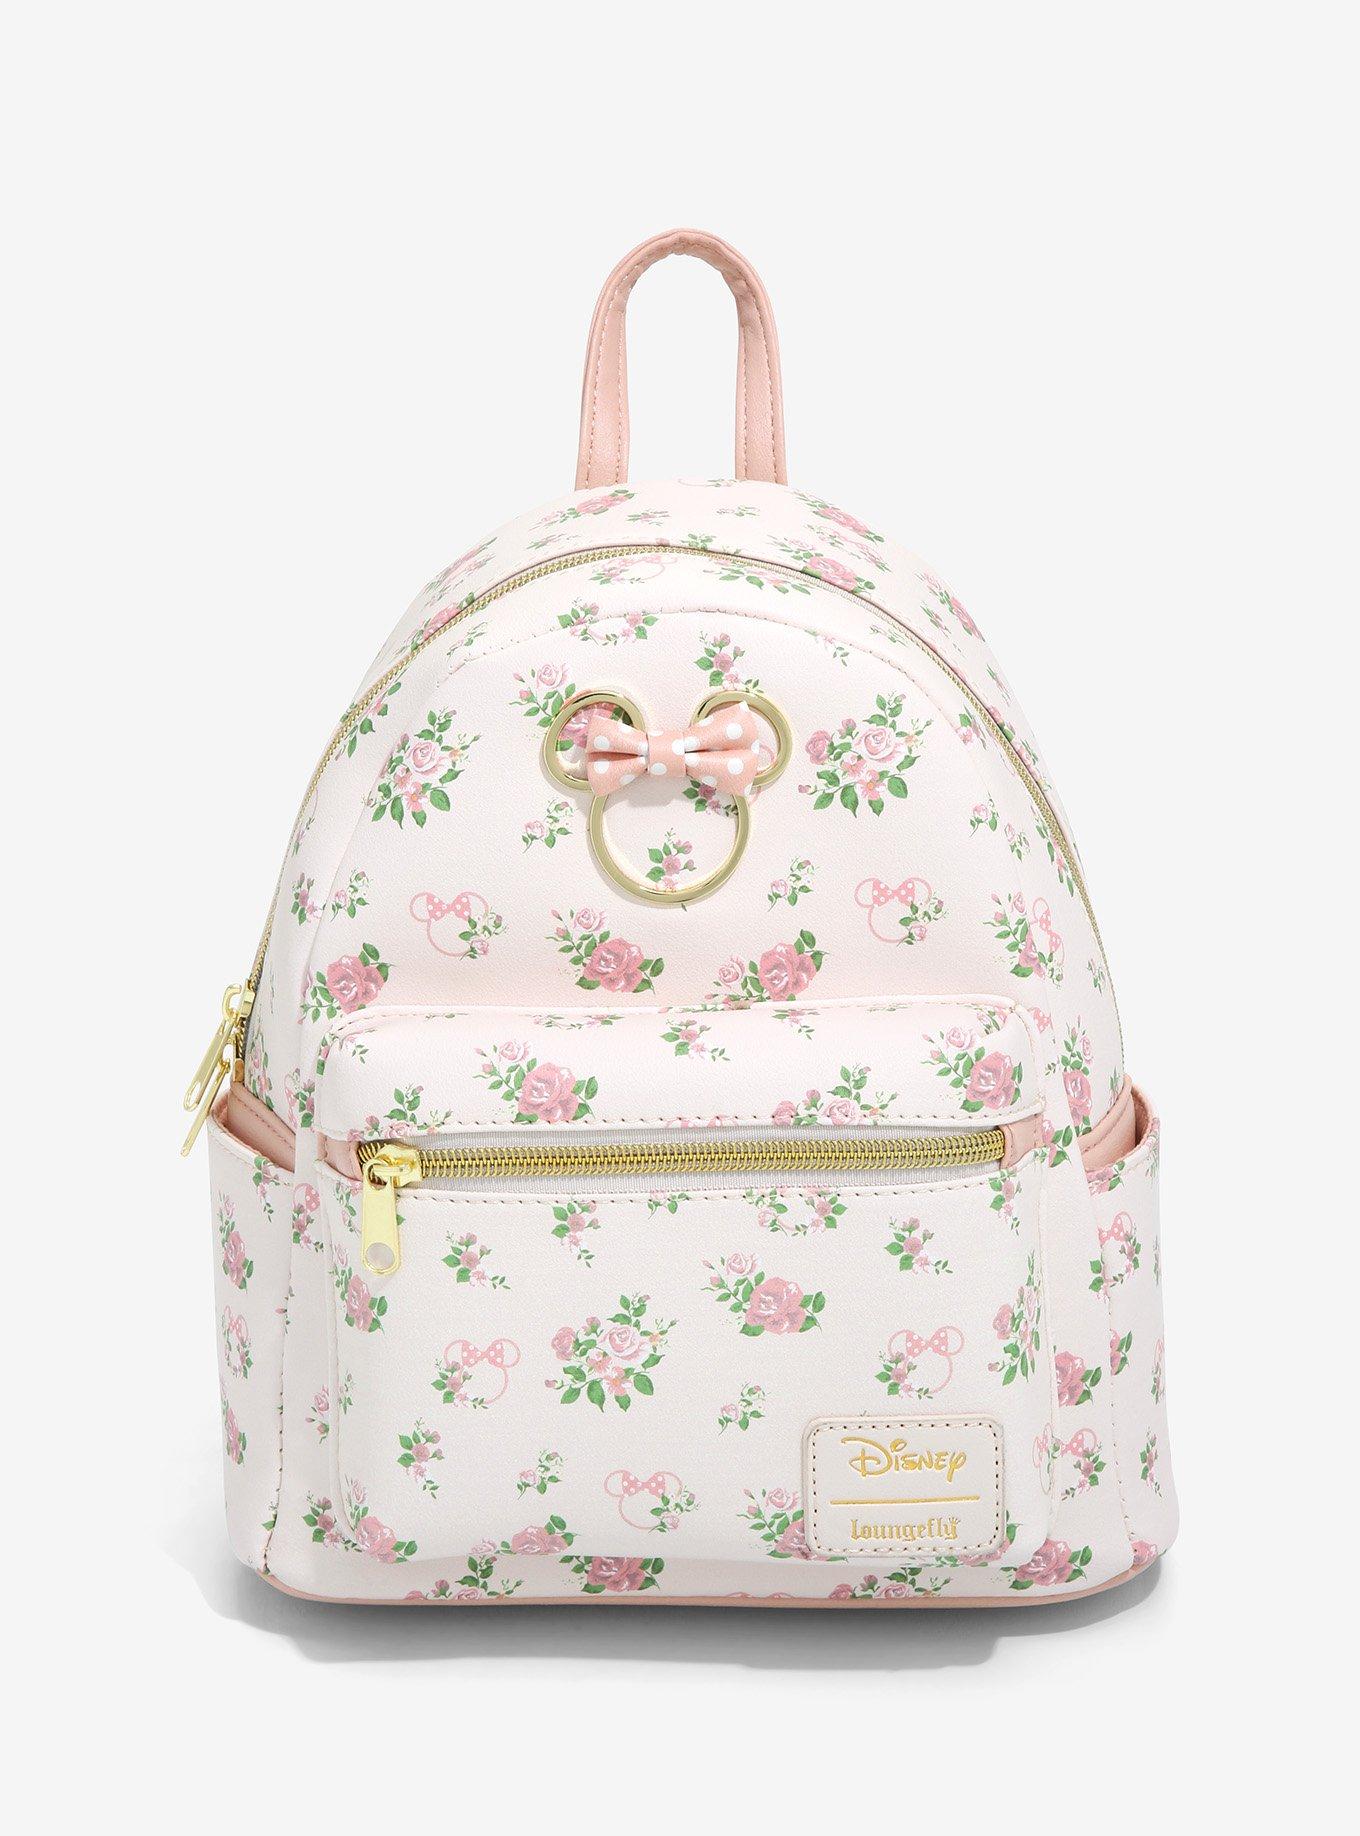 Printed Backpack - Light pink/Minnie Mouse - Kids